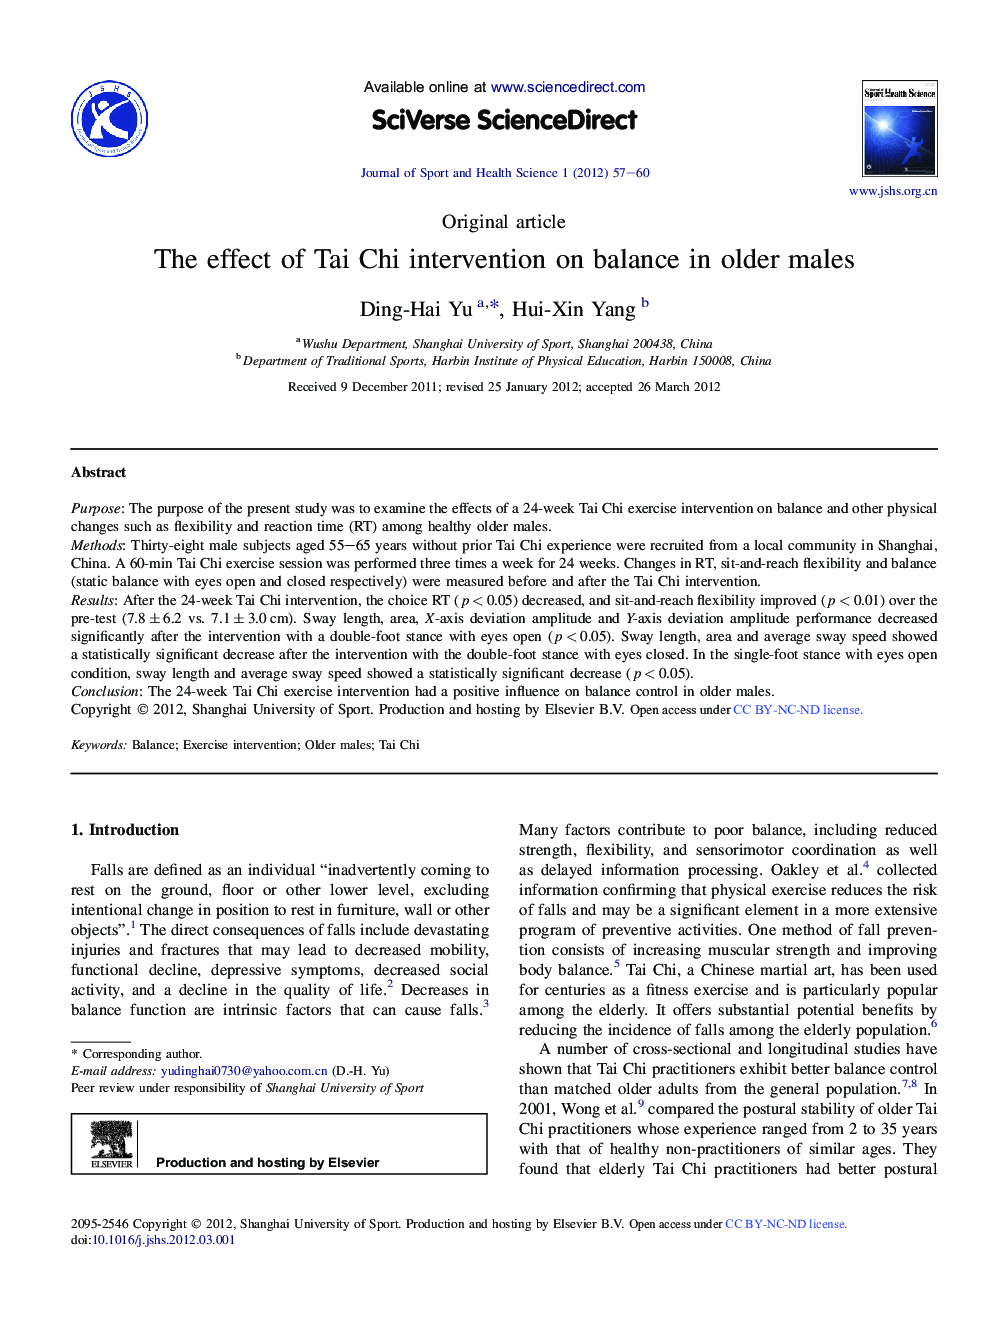 The effect of Tai Chi intervention on balance in older males 